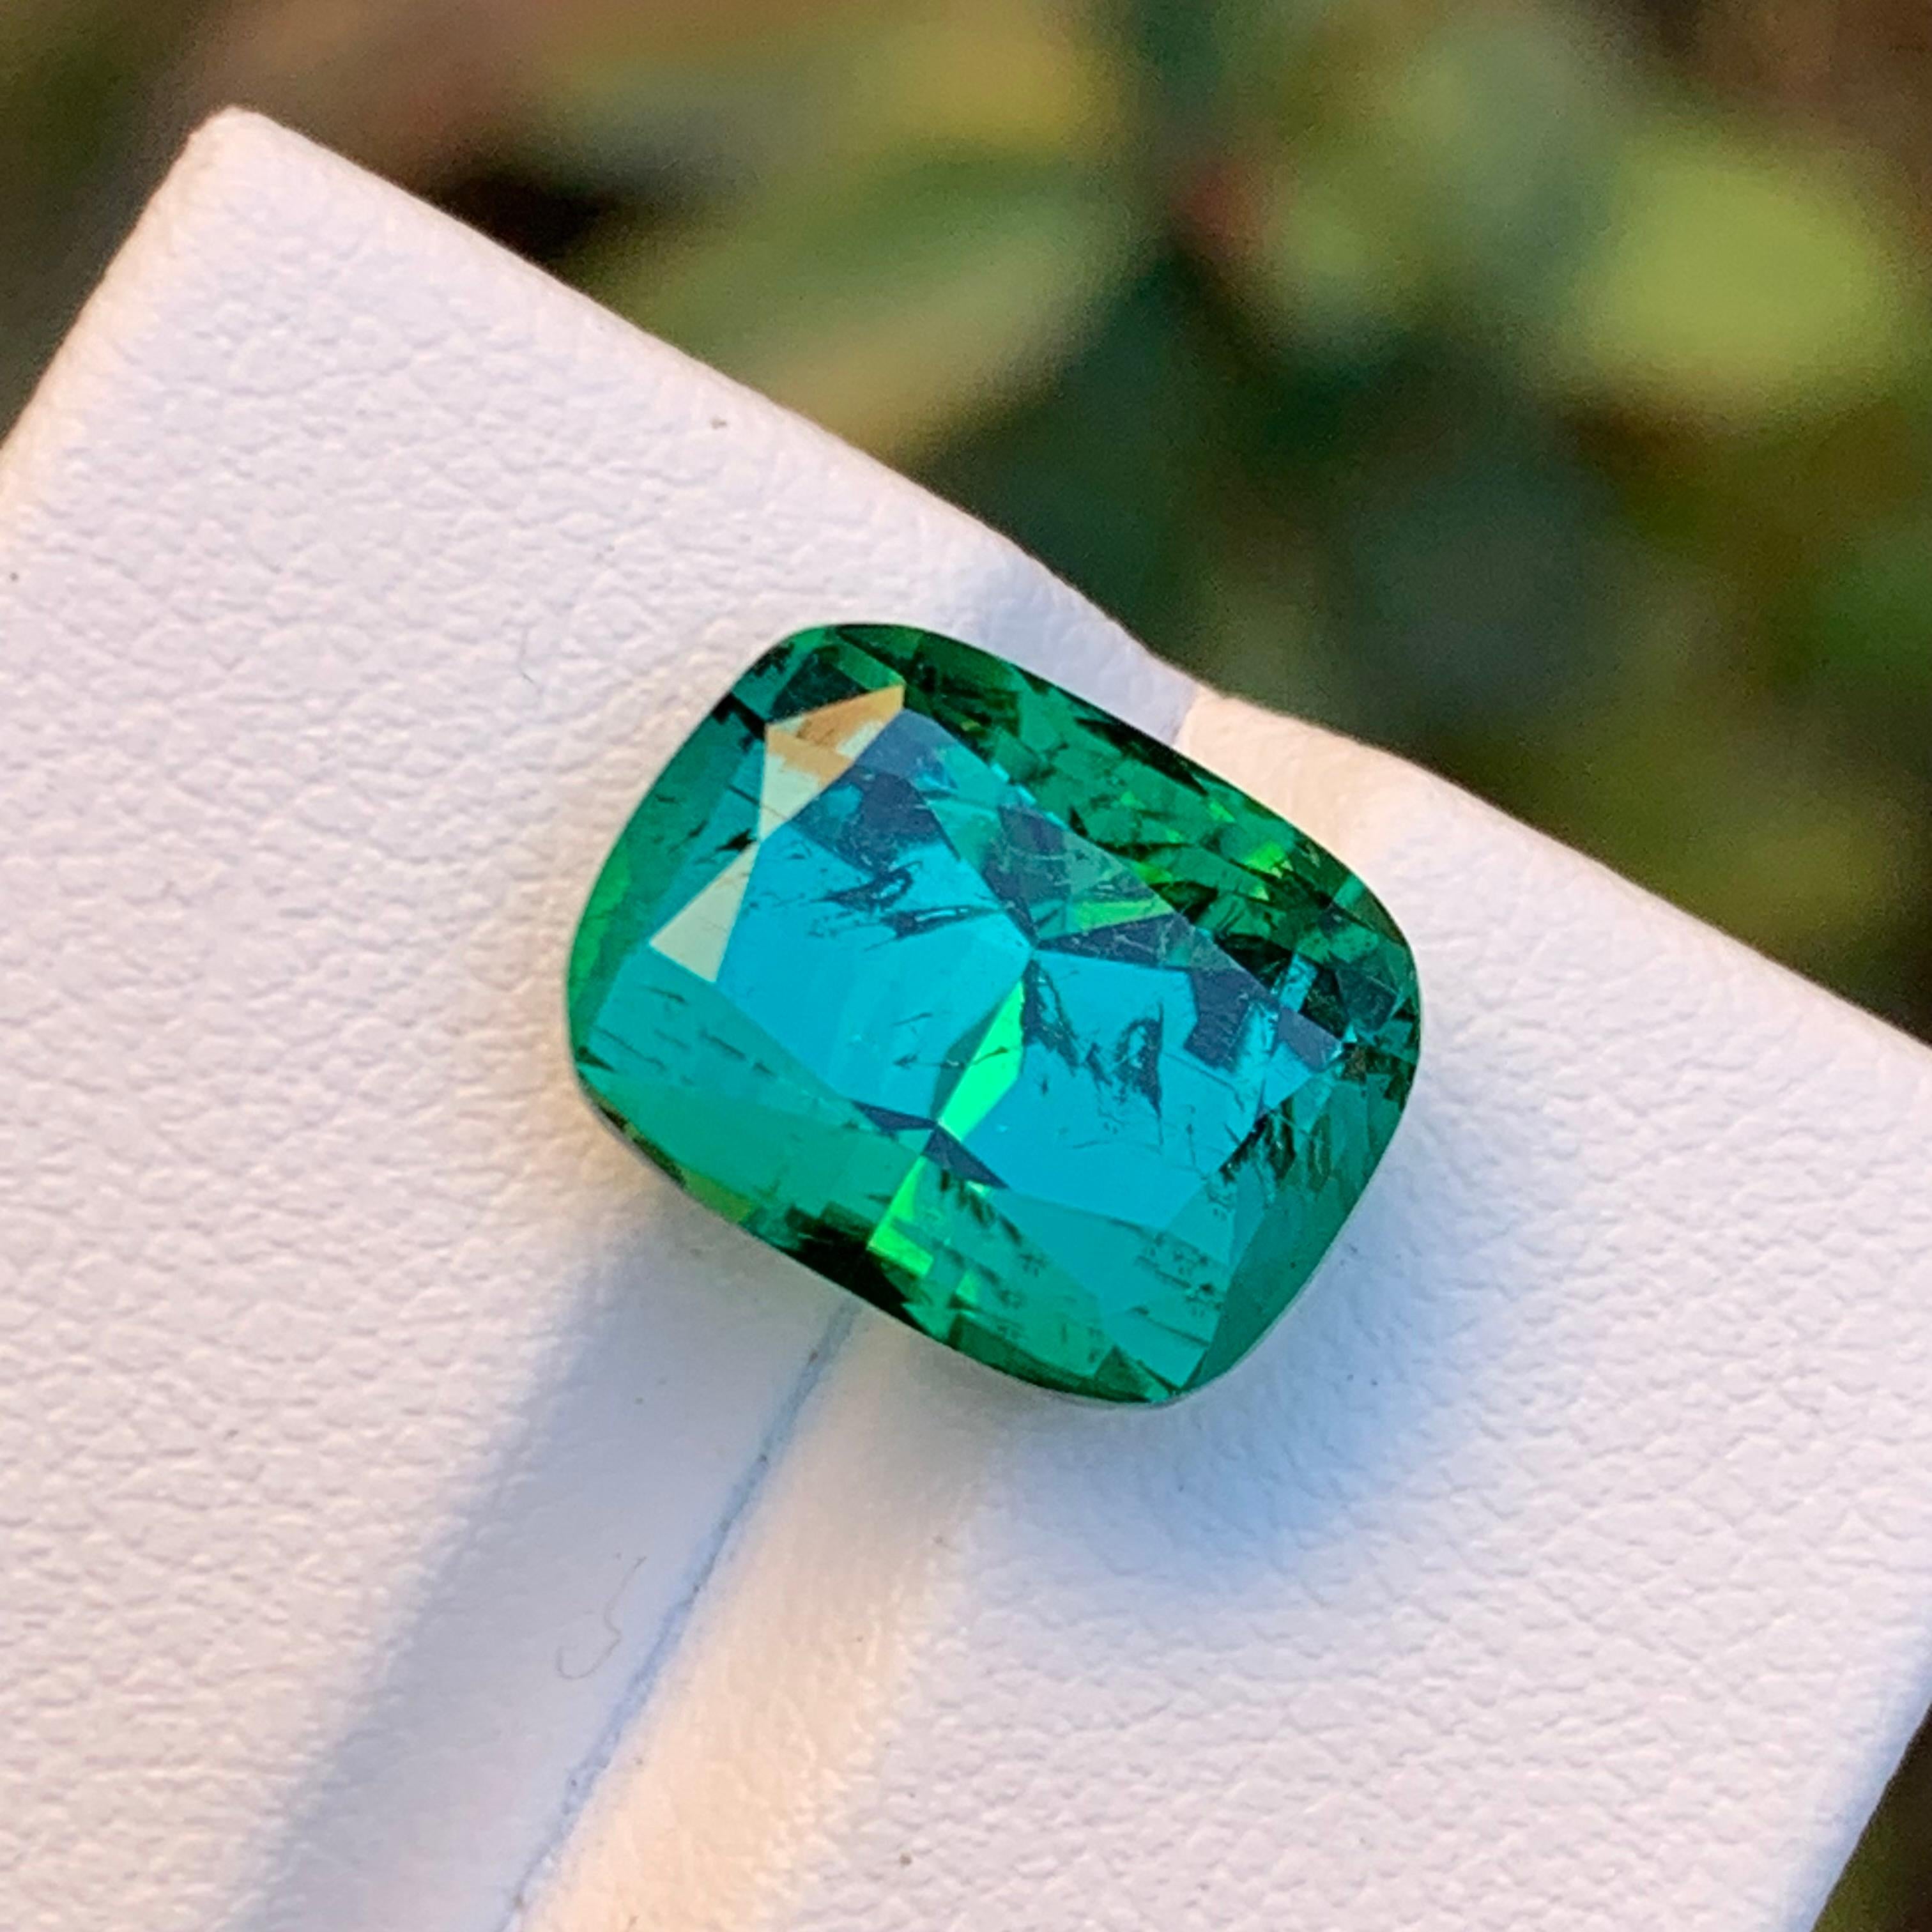 Introducing our exquisite Lagoon Green Natural Tourmaline Loose Gemstone, a rare find of top-tier quality. Meticulously cut and polished in a captivating cushion cut design, this gem boasts excellent luster and a subtle inclusion that adds